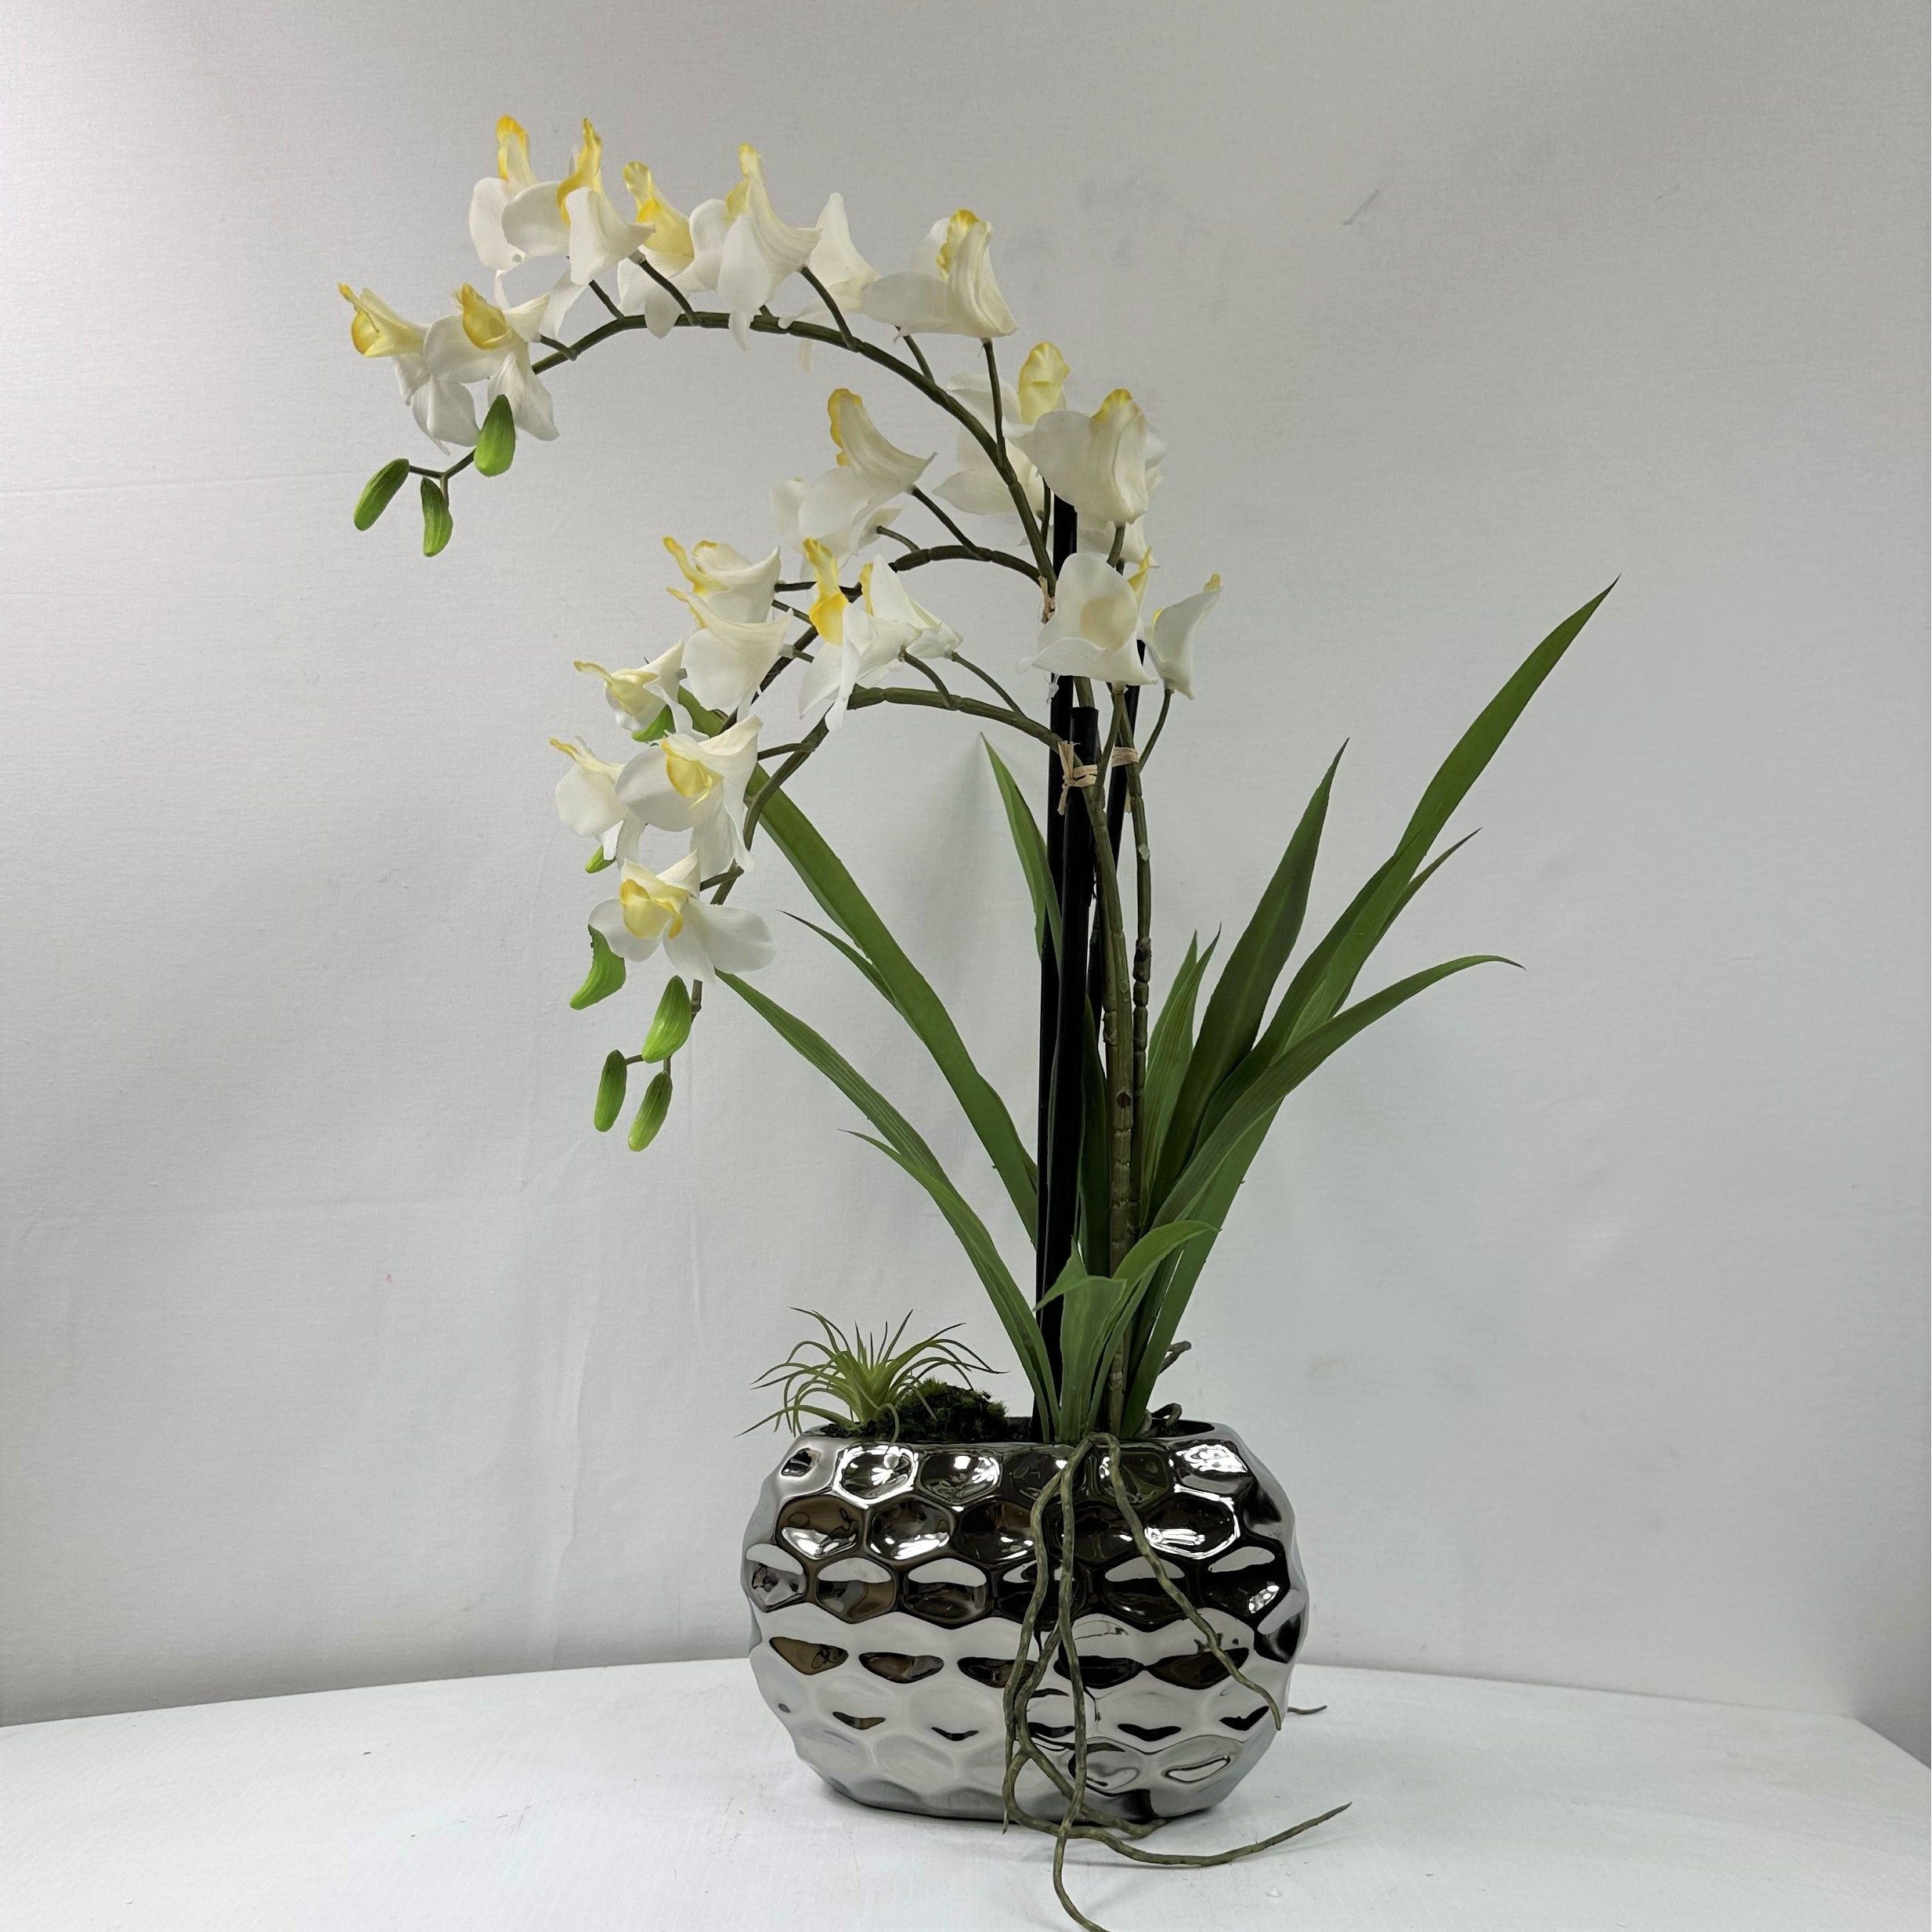 Dendrobium Orchid X 3 in silver vase